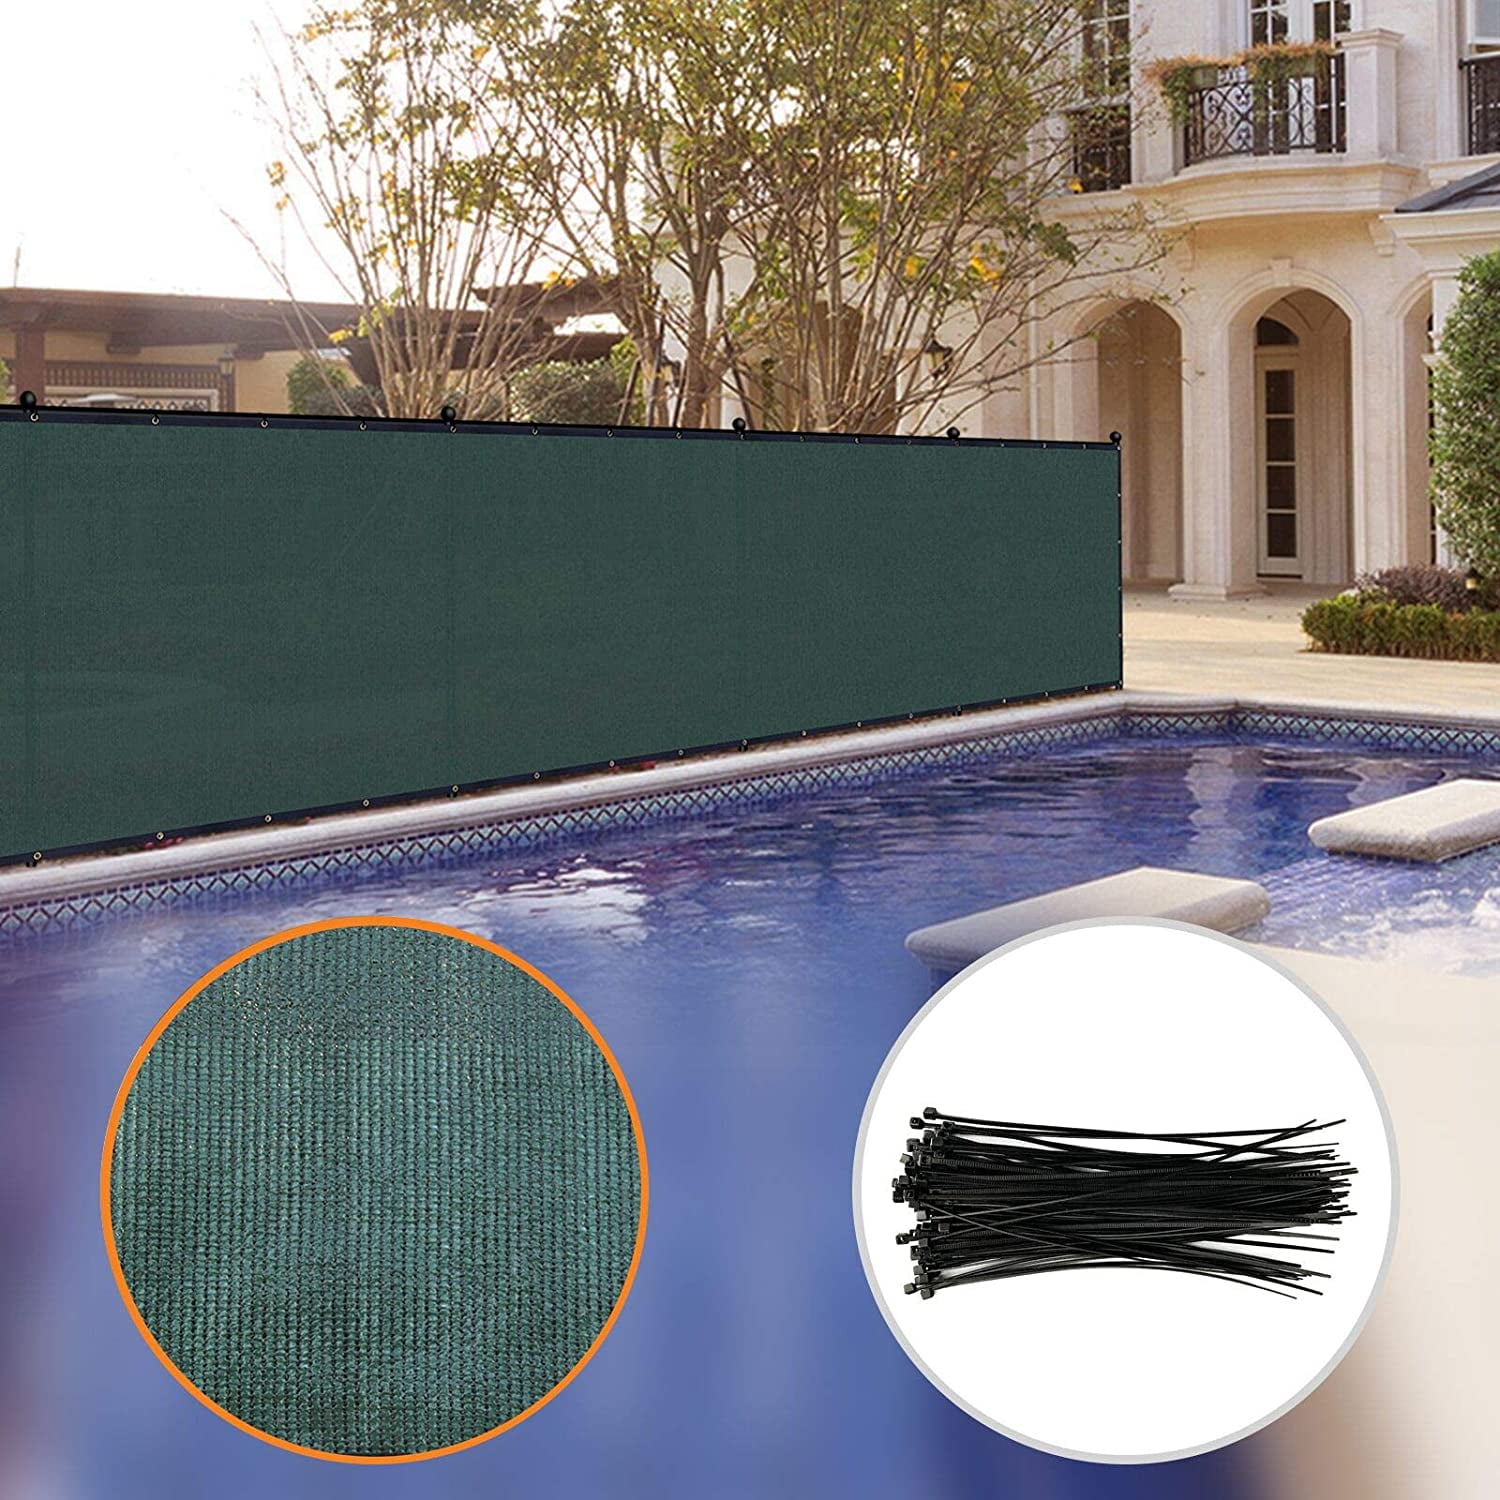 Ifenceview 6'x50' Green Fence Privacy Screen Mesh for Construction Yard Garden 